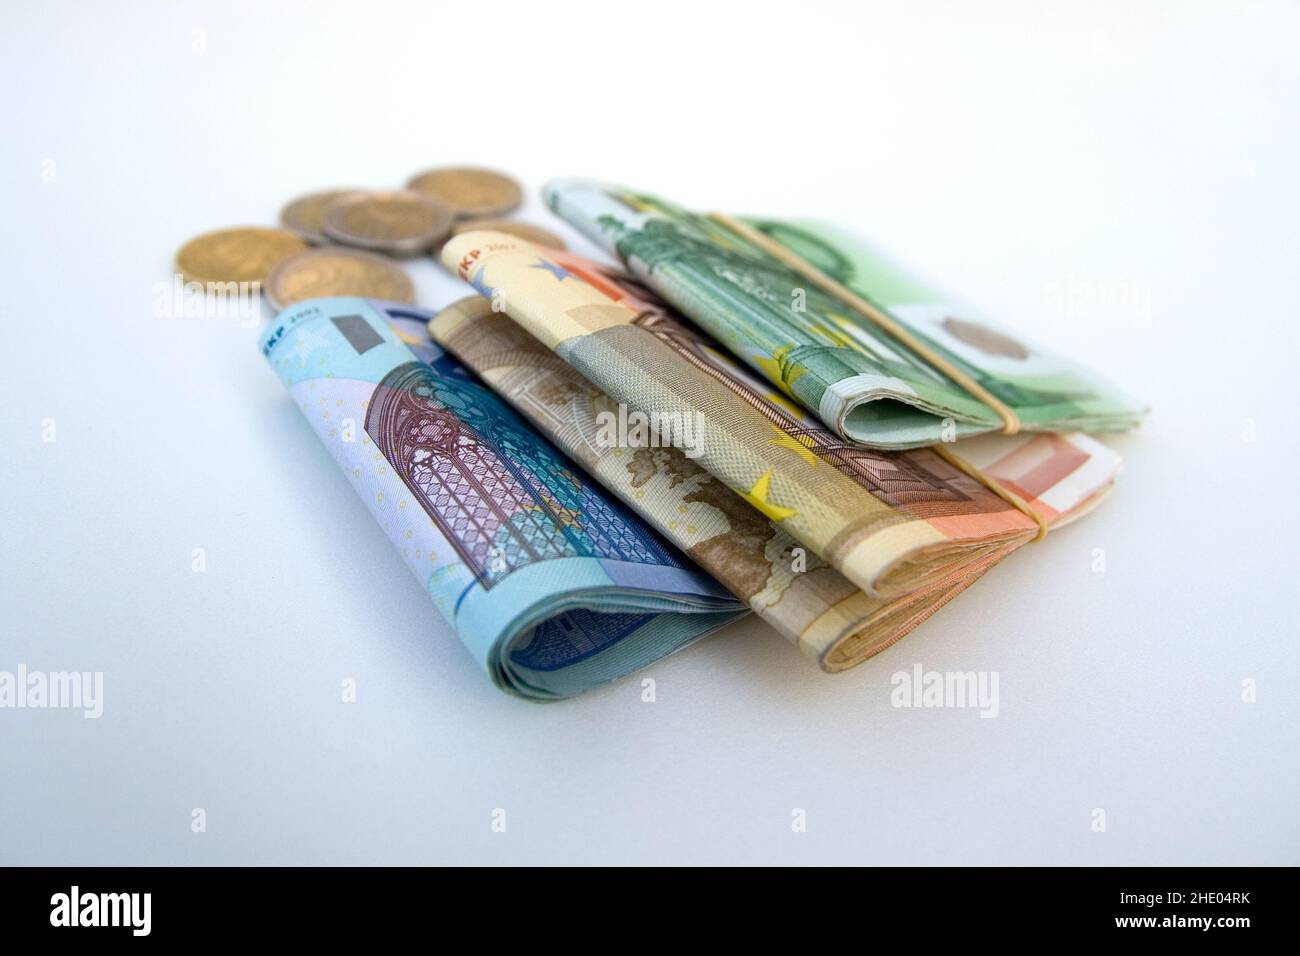 Euro banknotes and coins isolated on white background Stock Photo